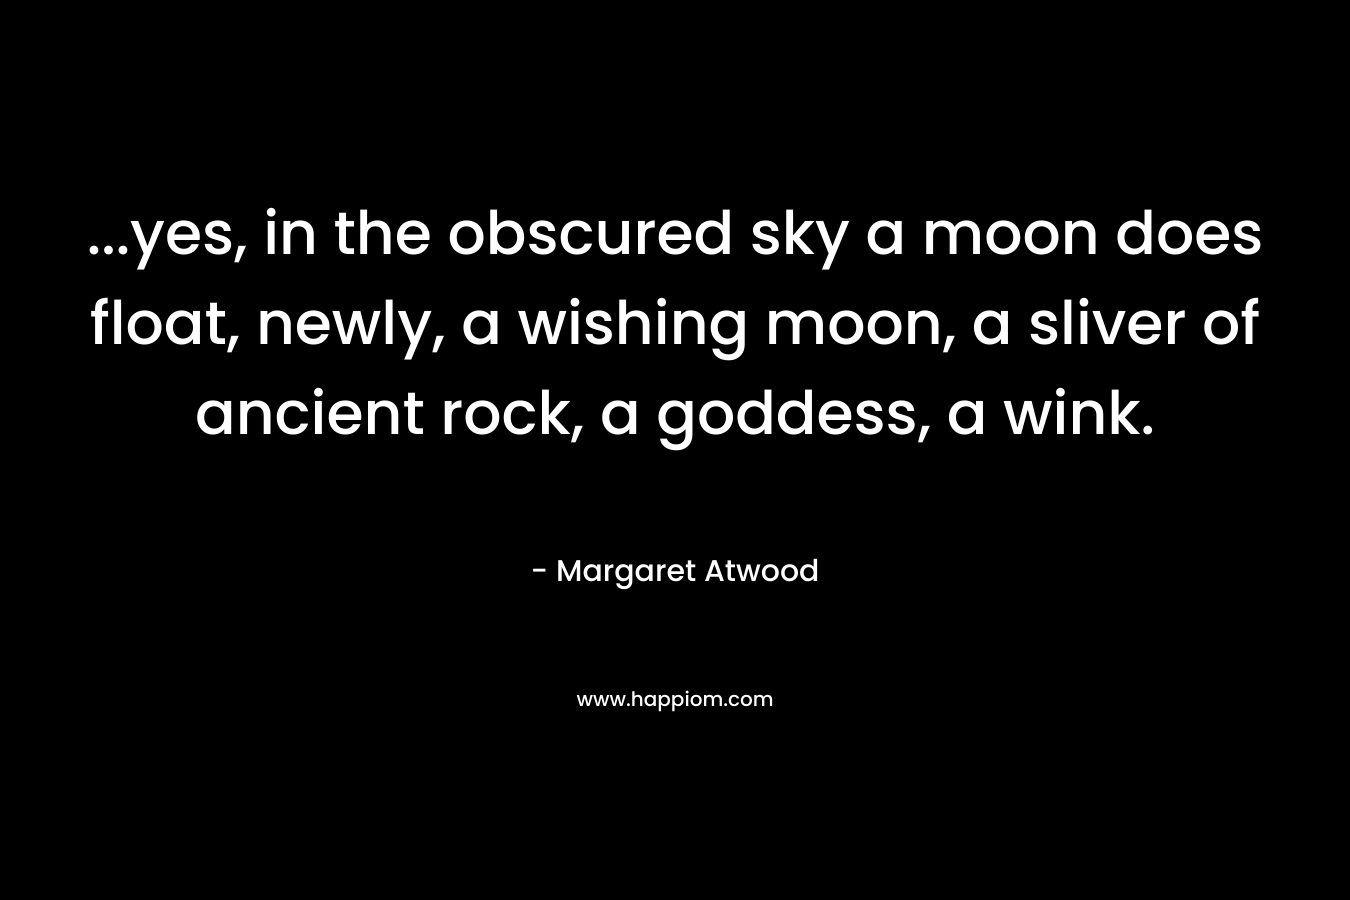 …yes, in the obscured sky a moon does float, newly, a wishing moon, a sliver of ancient rock, a goddess, a wink. – Margaret Atwood